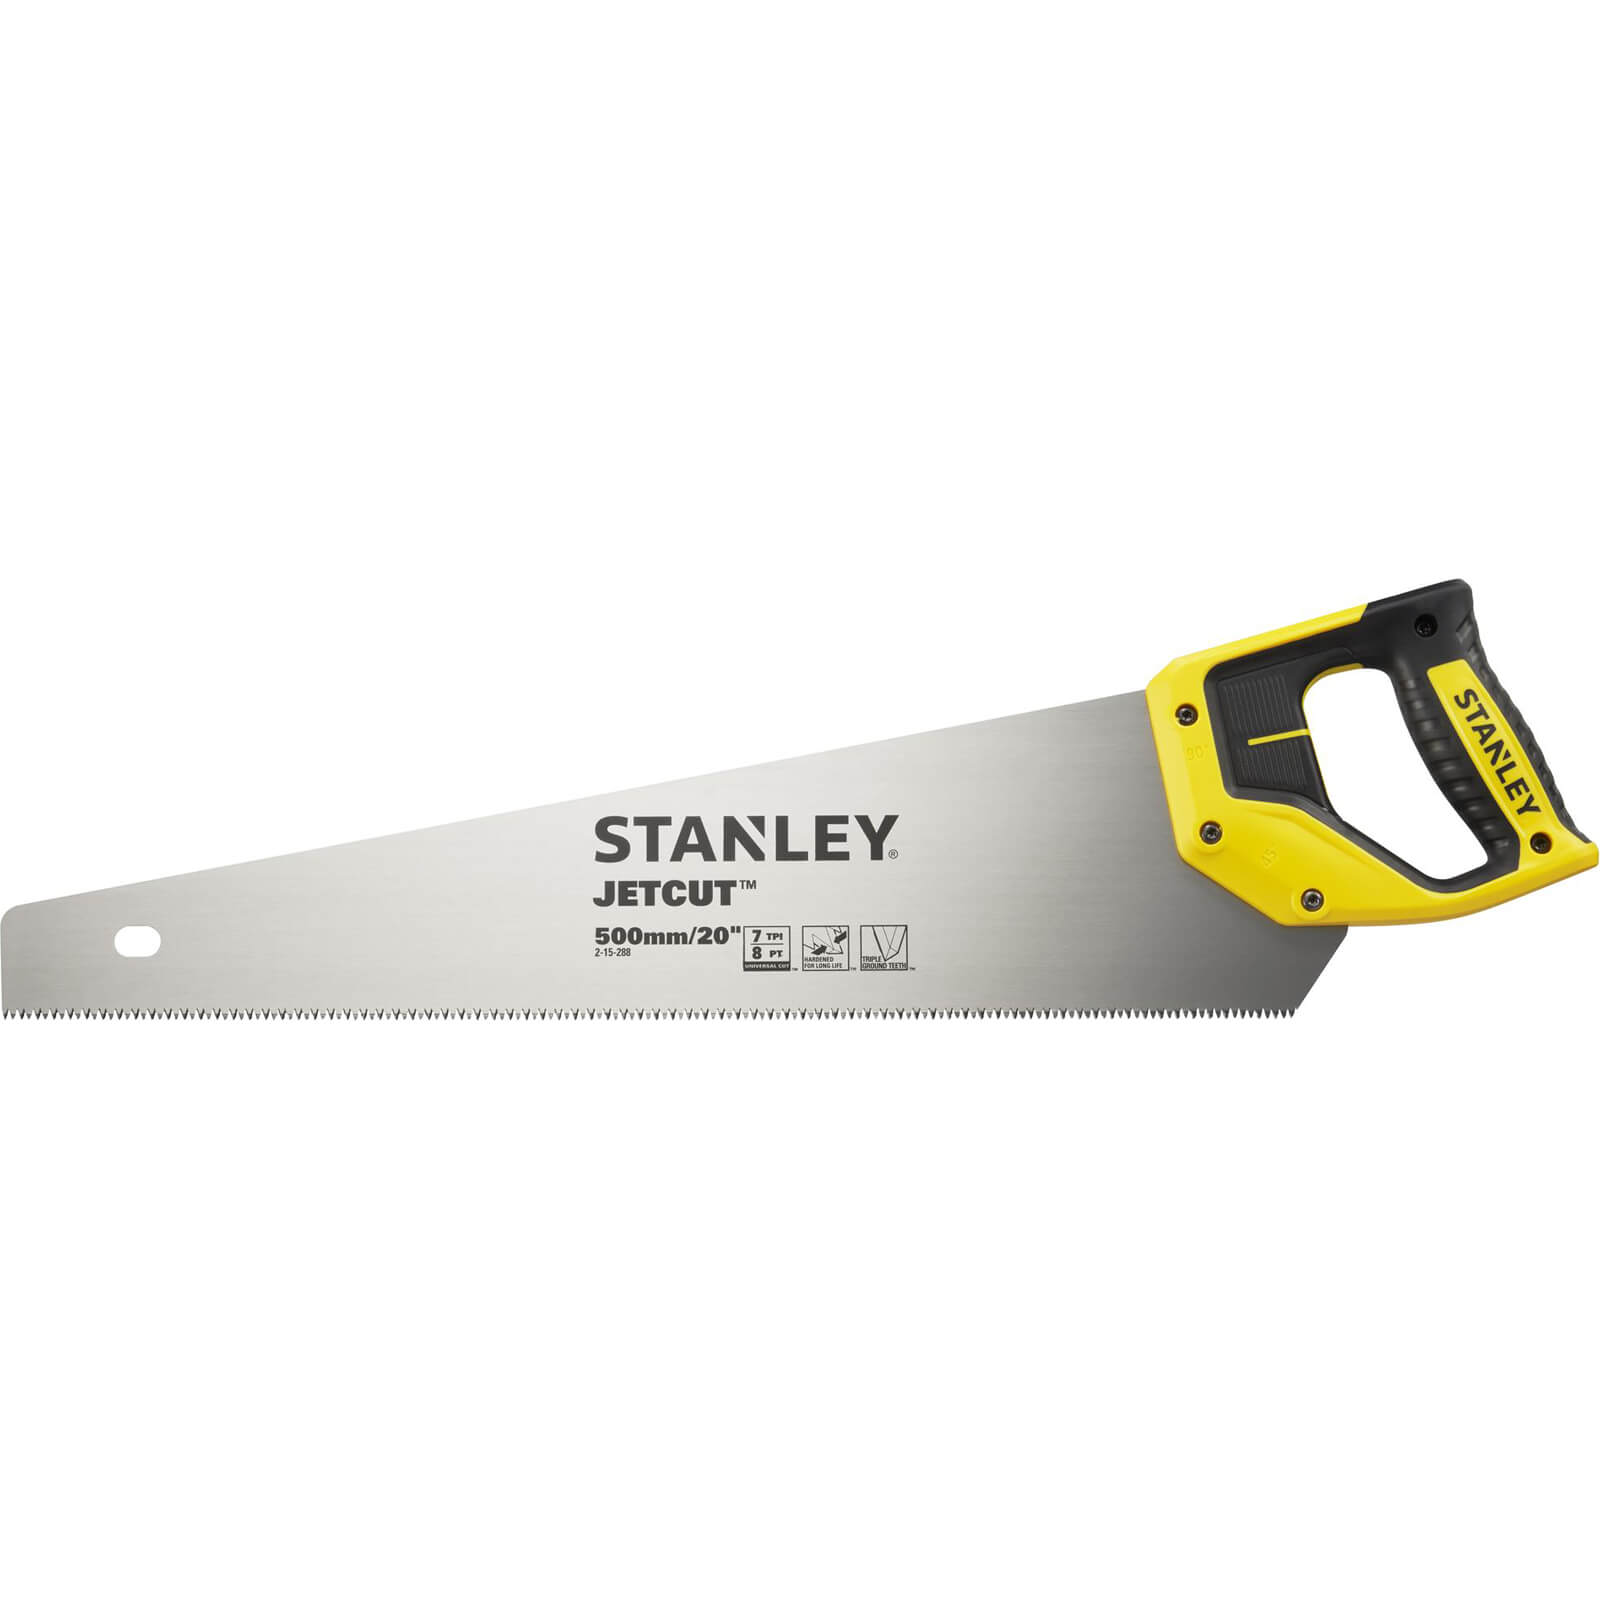 Image of Stanley Jet Cut Rough Hand Saw 20" / 500mm 8tpi